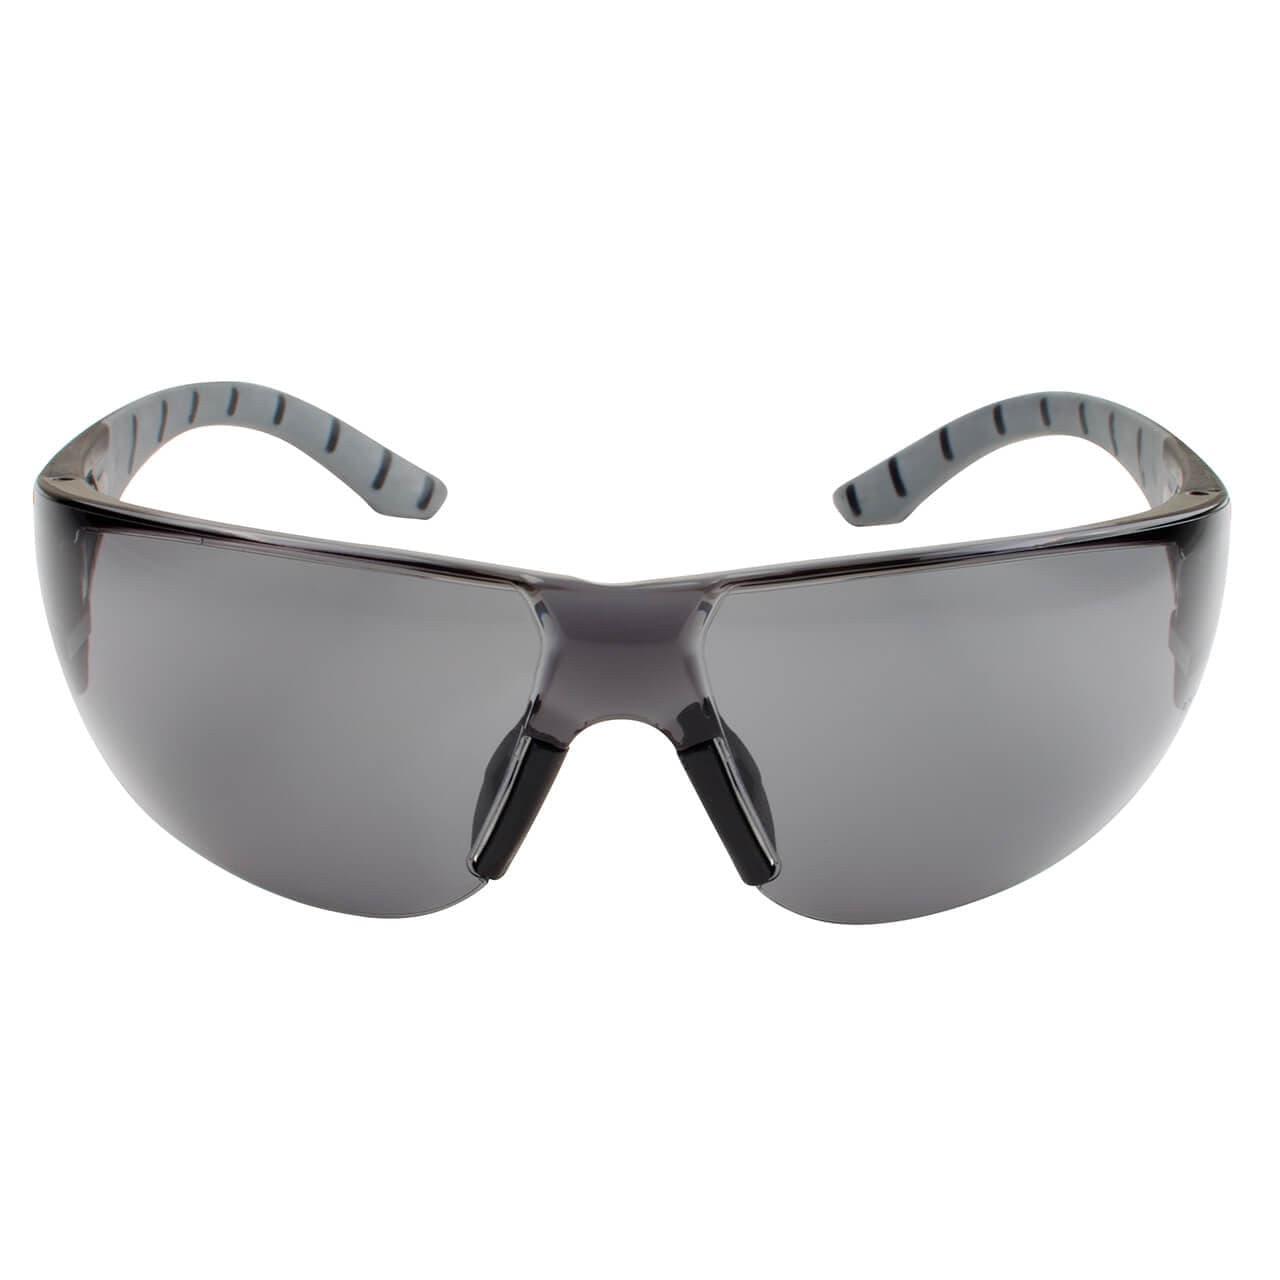 Metel M50 Safety Glasses with Gray Anti-Fog Lenses Front View